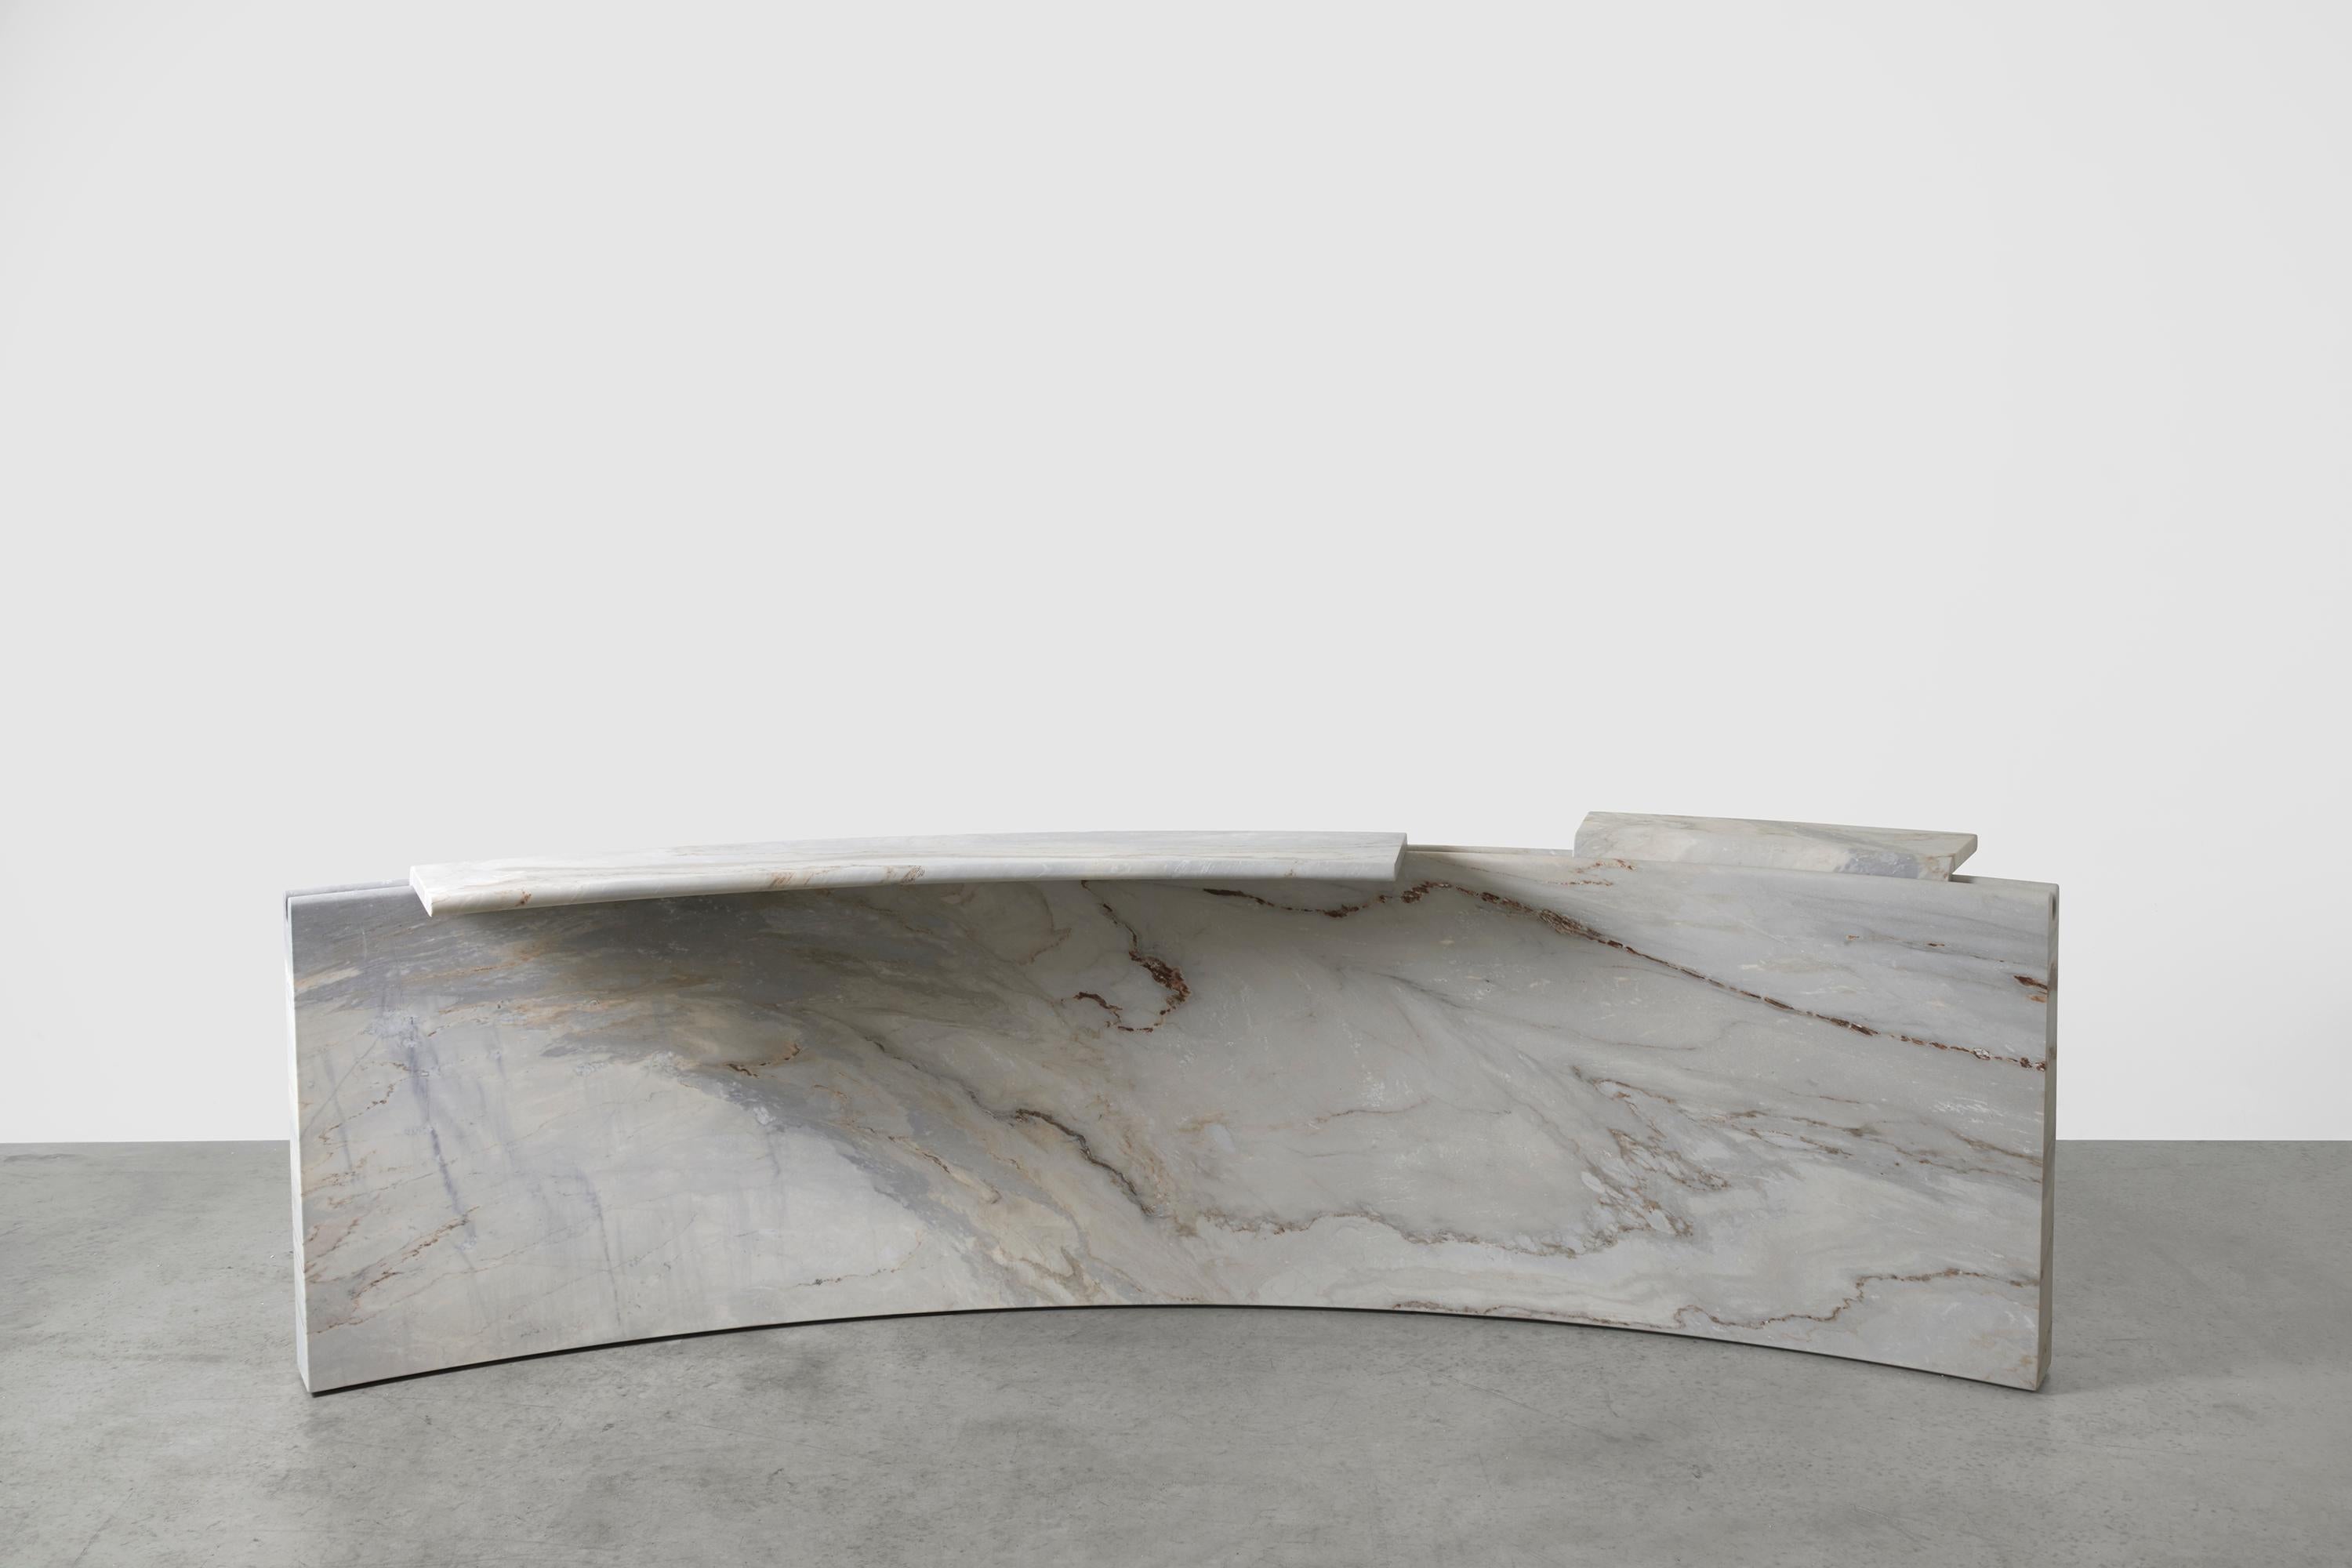 MASS Large Table by Agglomerati
Designed by Fred Ganim
Unique piece
Dimensions: D279 cm x W76 cm x H80 cm
Materials: Marble Palissandro Bluette
It Can be produced in several different sizes and a selection of other Italian marbles.

Grounded